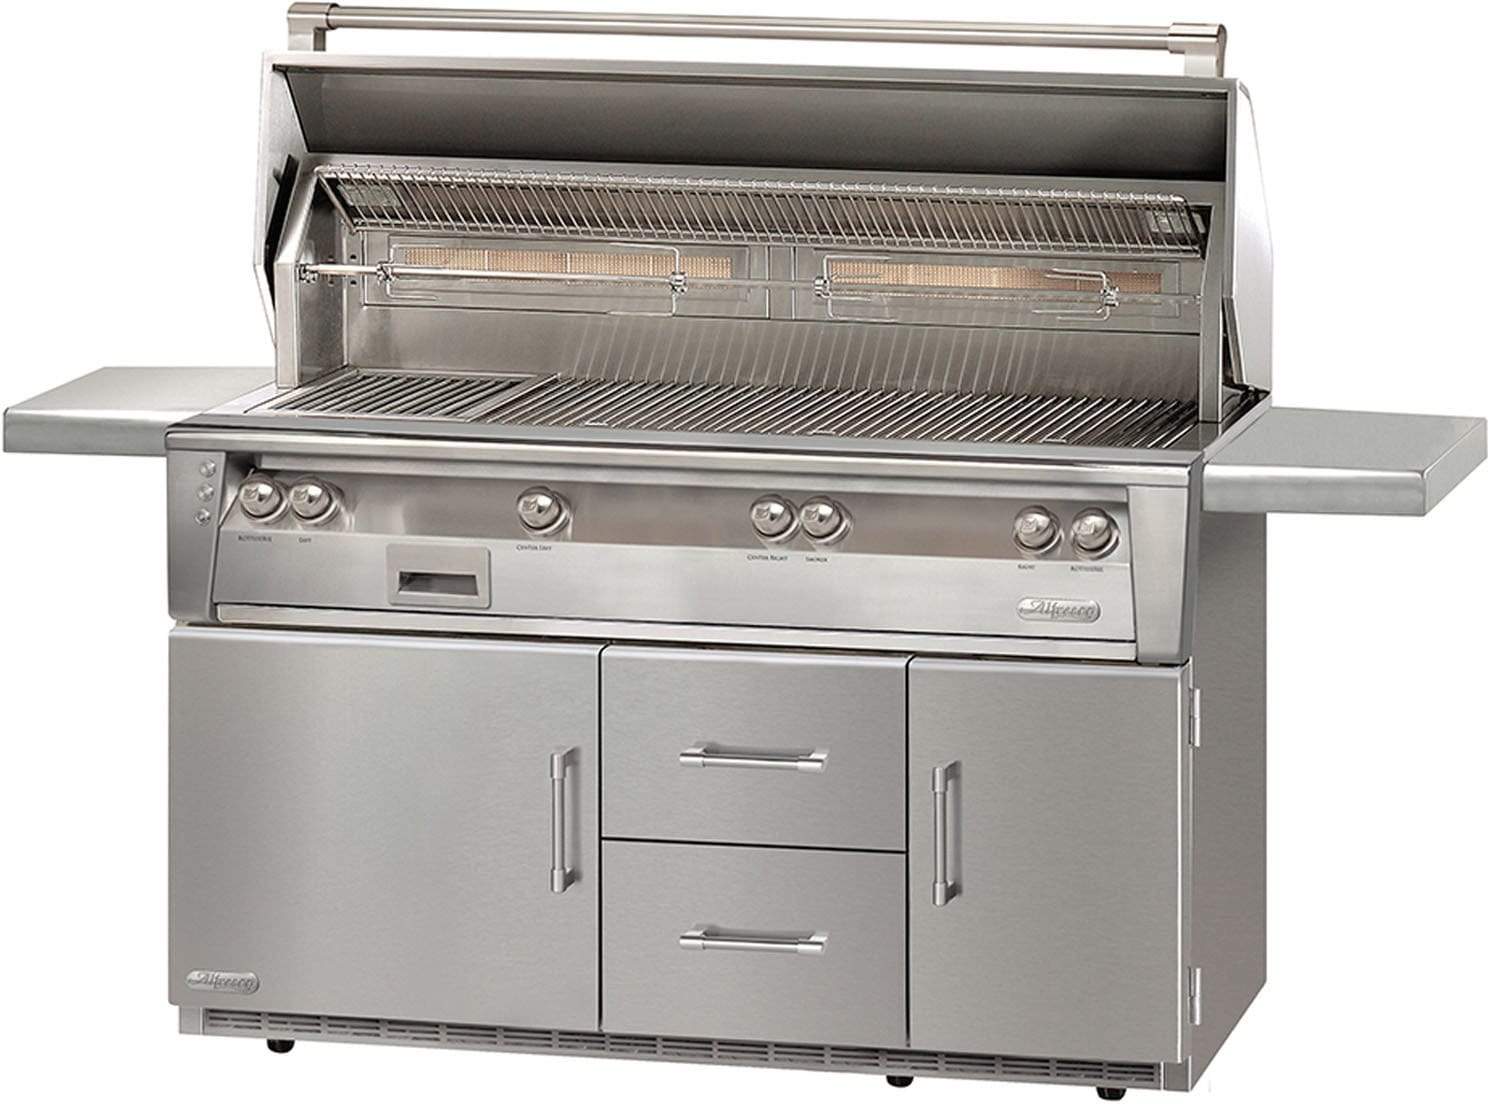 Alfresco Grills Natural Gas Alfresco 56 Inch Grill with Grilling Surface, Three Main Burners, Infrared Sear Zone, Integrated Rotisserie, Smoker and Herb Infuser System, 3-Position Warming Rack, Halogen Lighting and Refrigerated Cart: ALXE-56BFGR